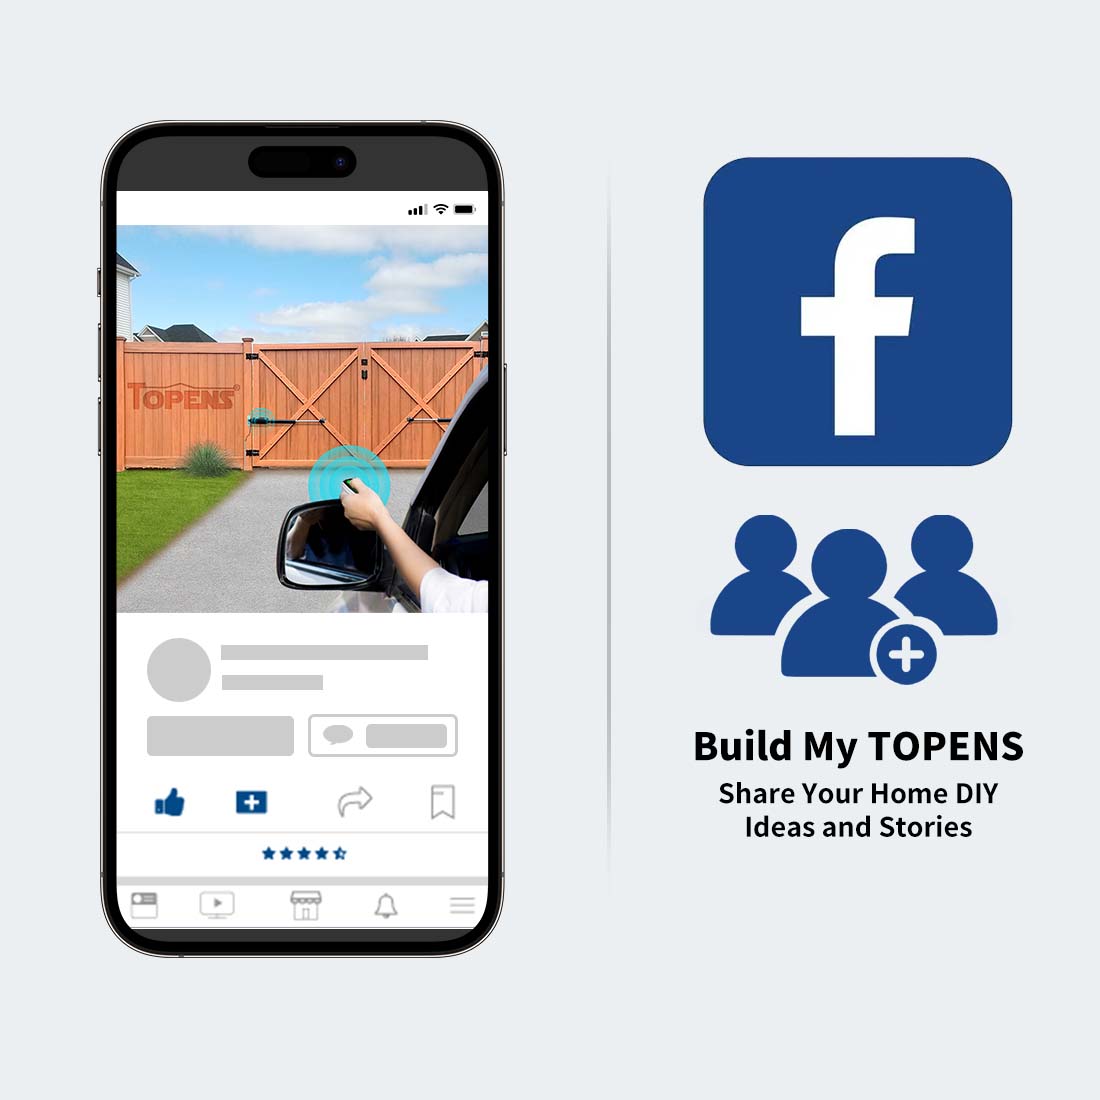 Join TOPENS Facebook Group